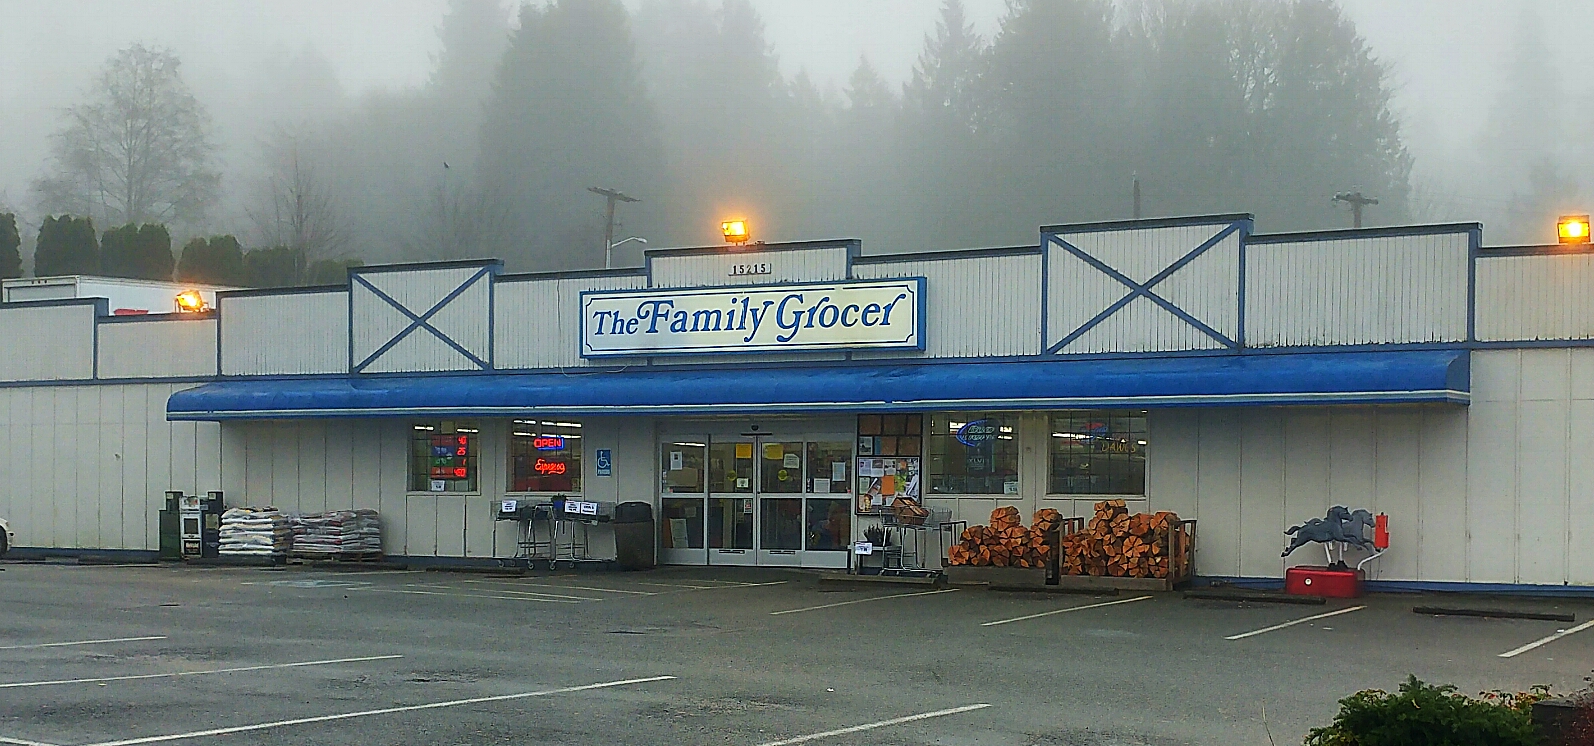 The Family Grocer